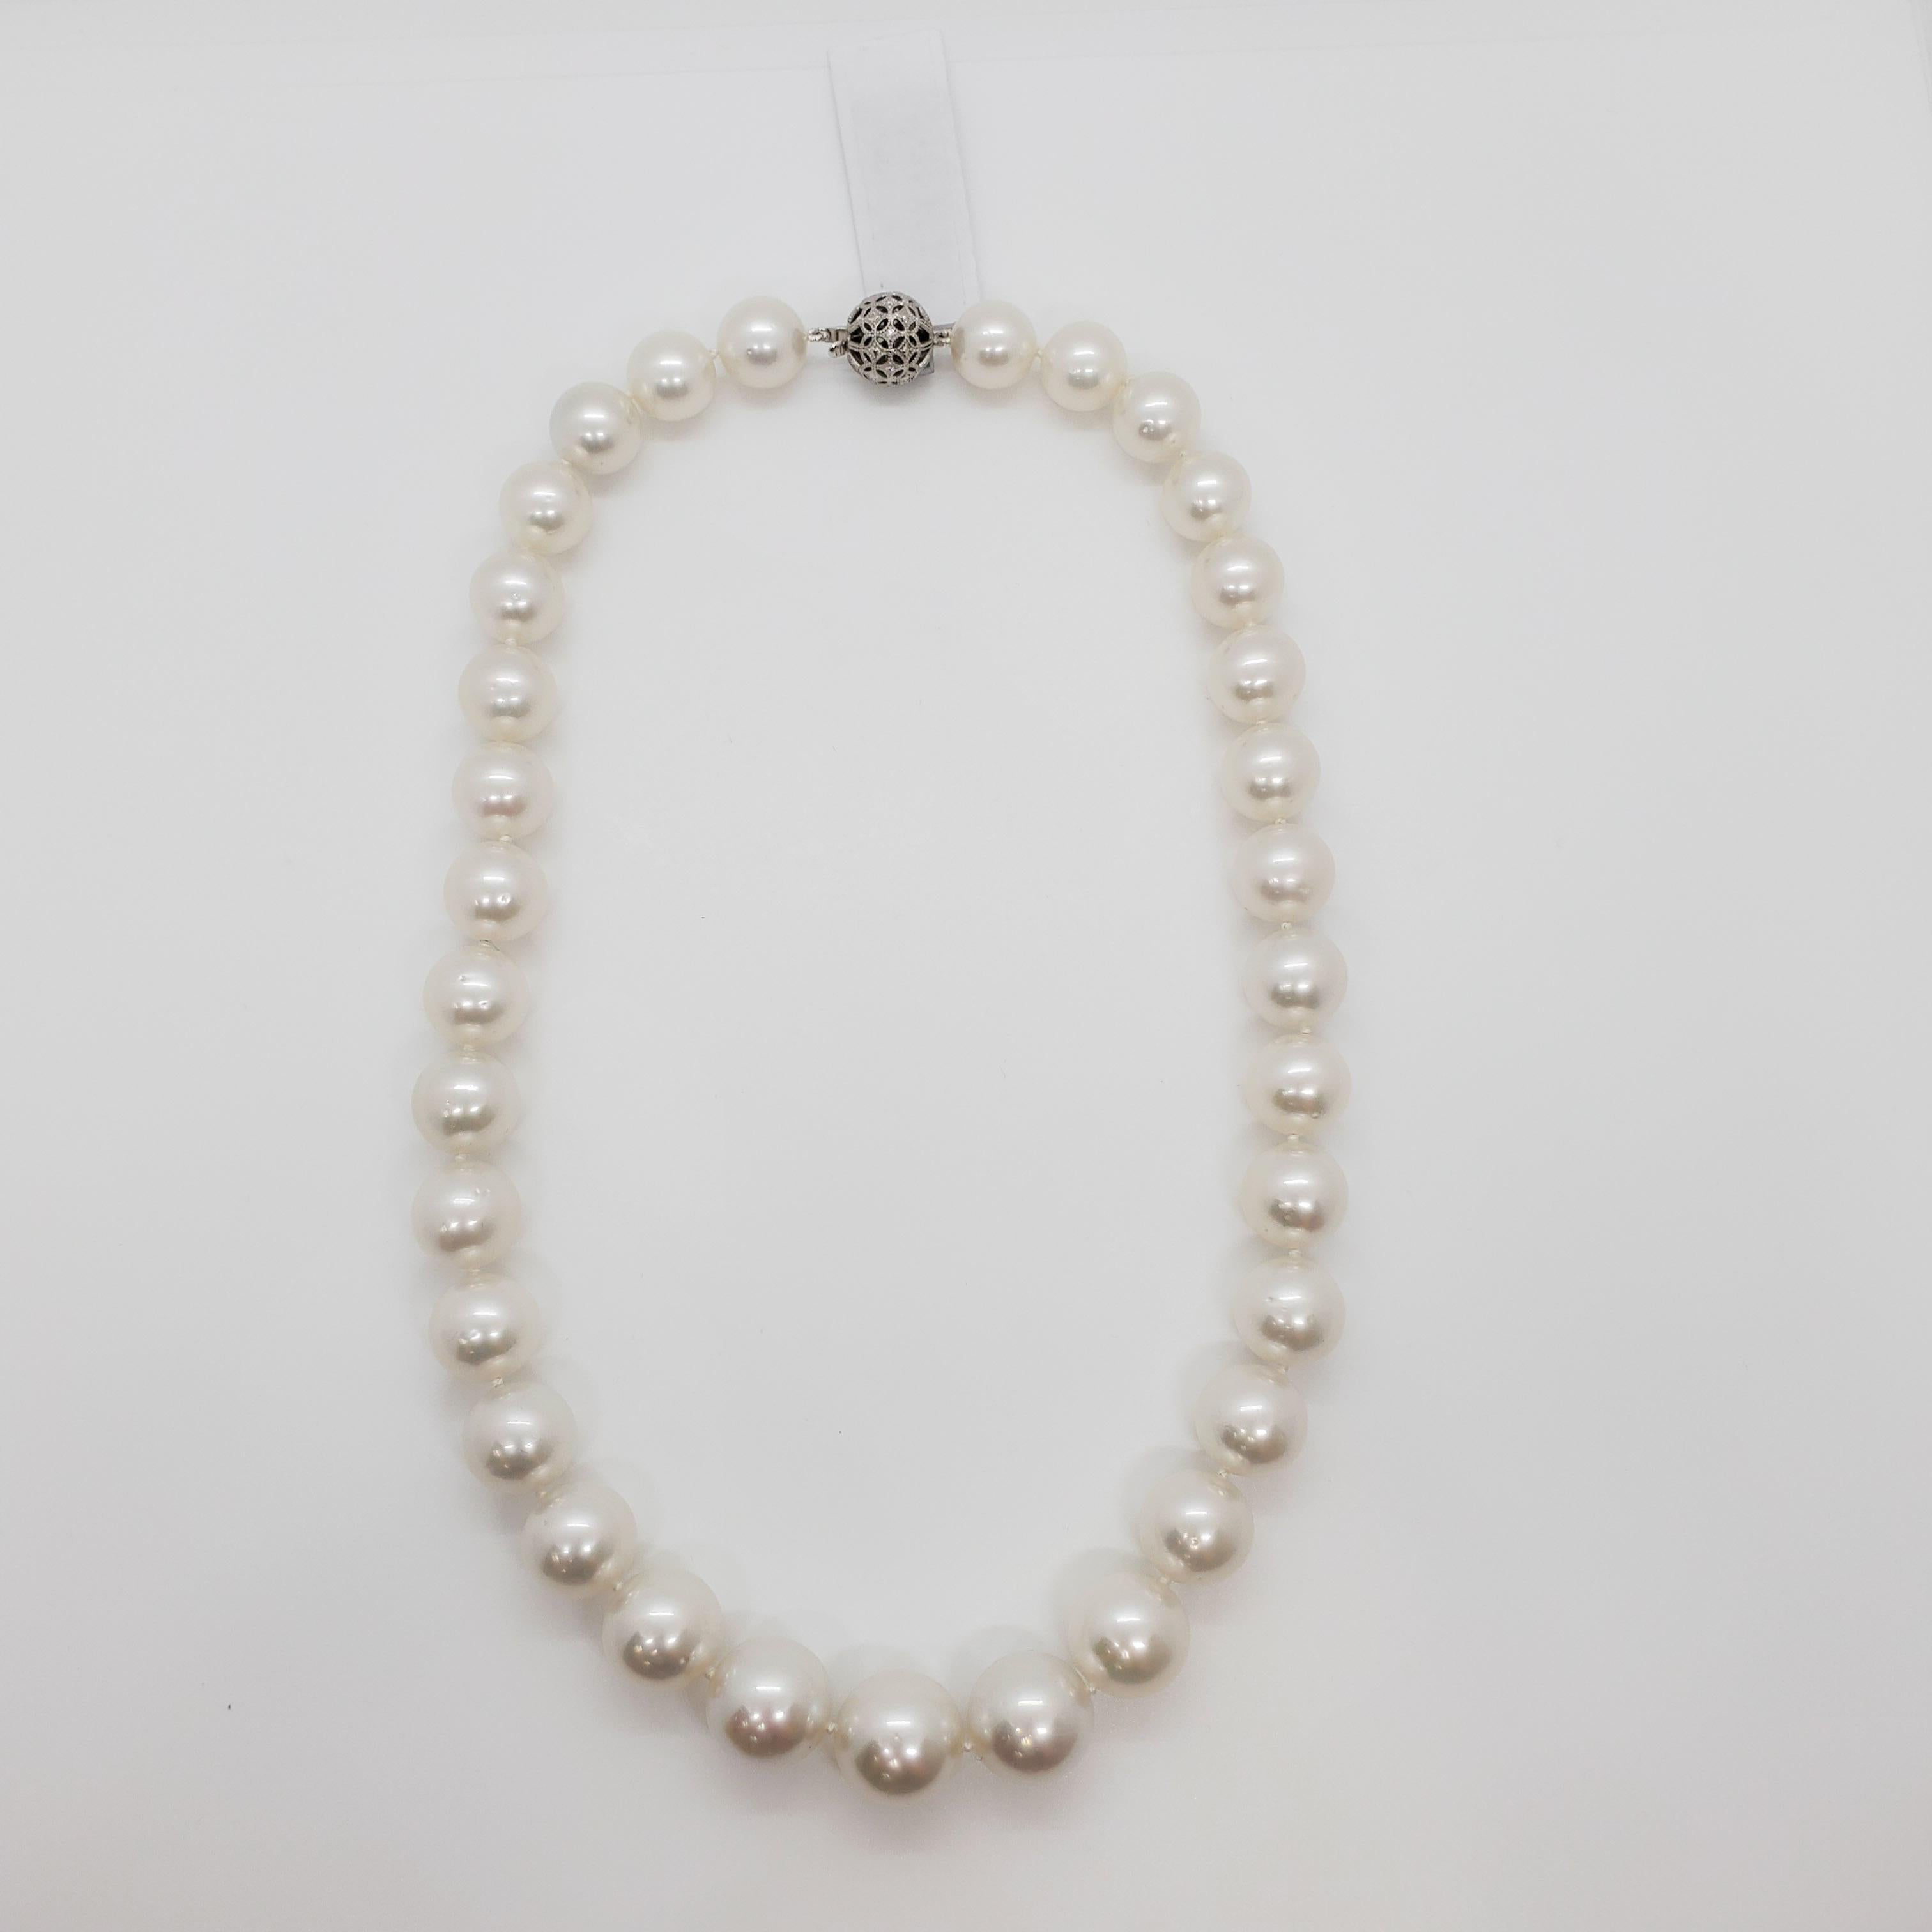 Gorgeous white round South Sea pearls with very little blemishes and a beautiful luster.  Total 33 pearls, 12- 15.55 mm in size, 18.75